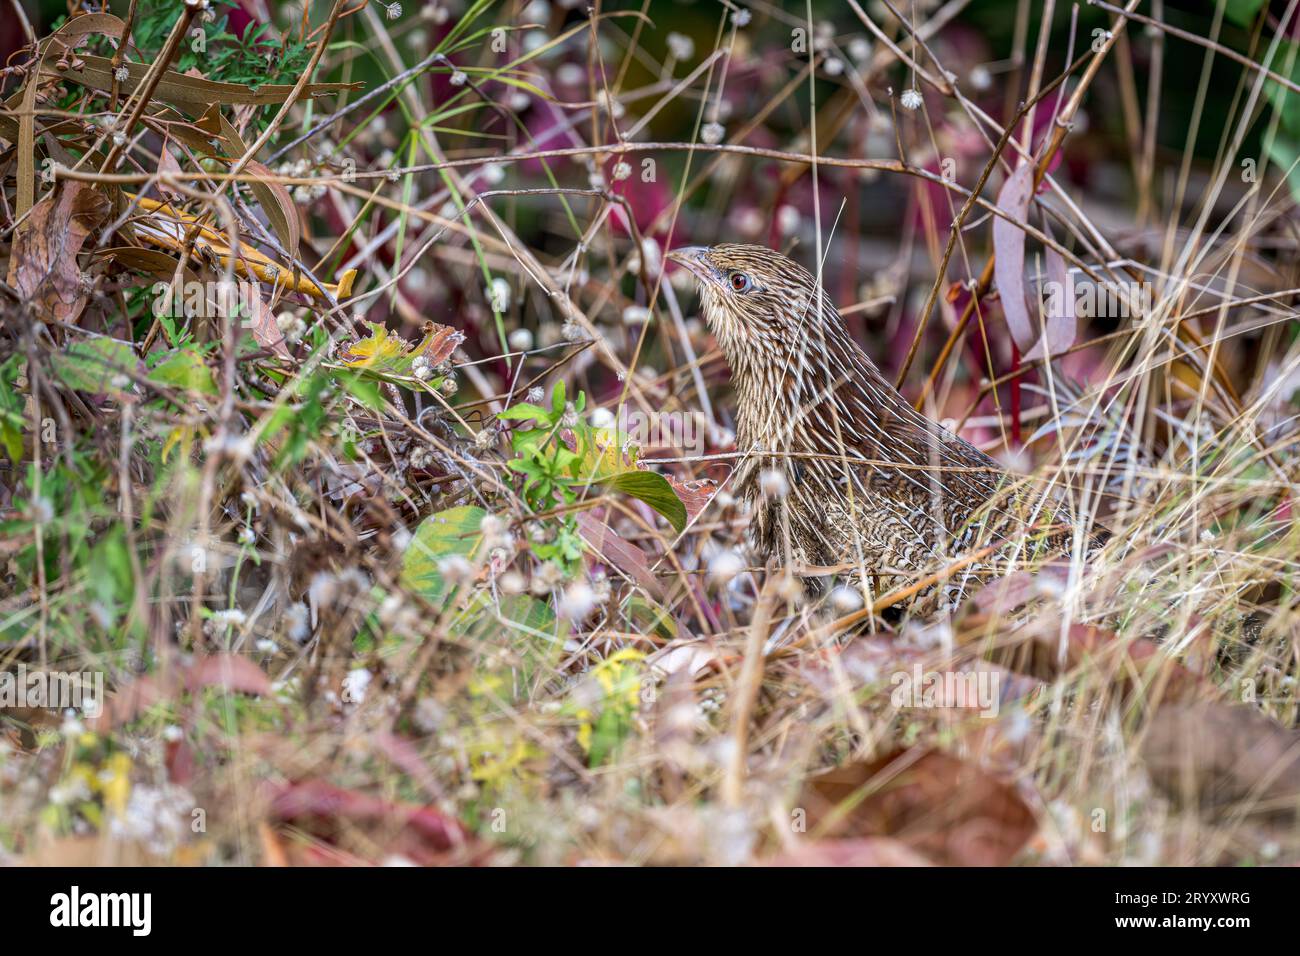 A single Pheasant Coucal showing predatory behaviour on the ground in thick grassy undergrowth as it looks for breakfast on Magnetic Is. in Australia. Stock Photo